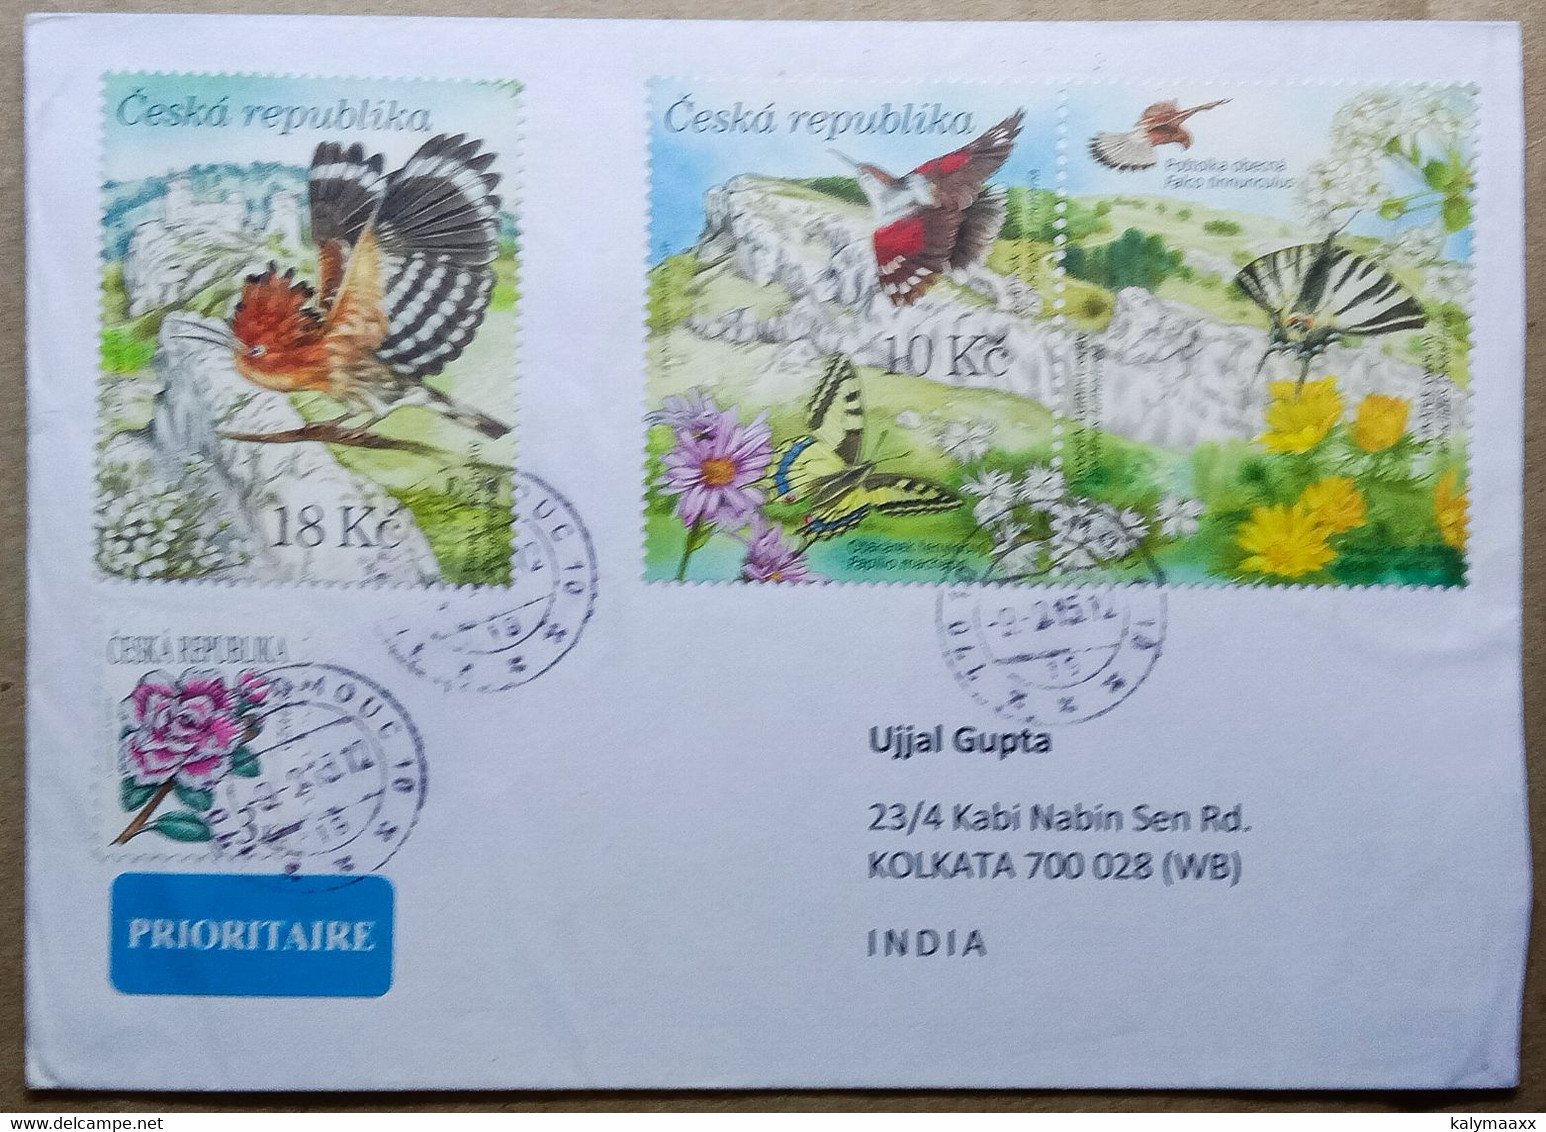 CZECH REPUBLIC TO INDIA 2012 COMMERCIAL USED COVER, BIRDS, BUTTERFLY, FLOWERS, FLORA & FAUNA - Briefe U. Dokumente